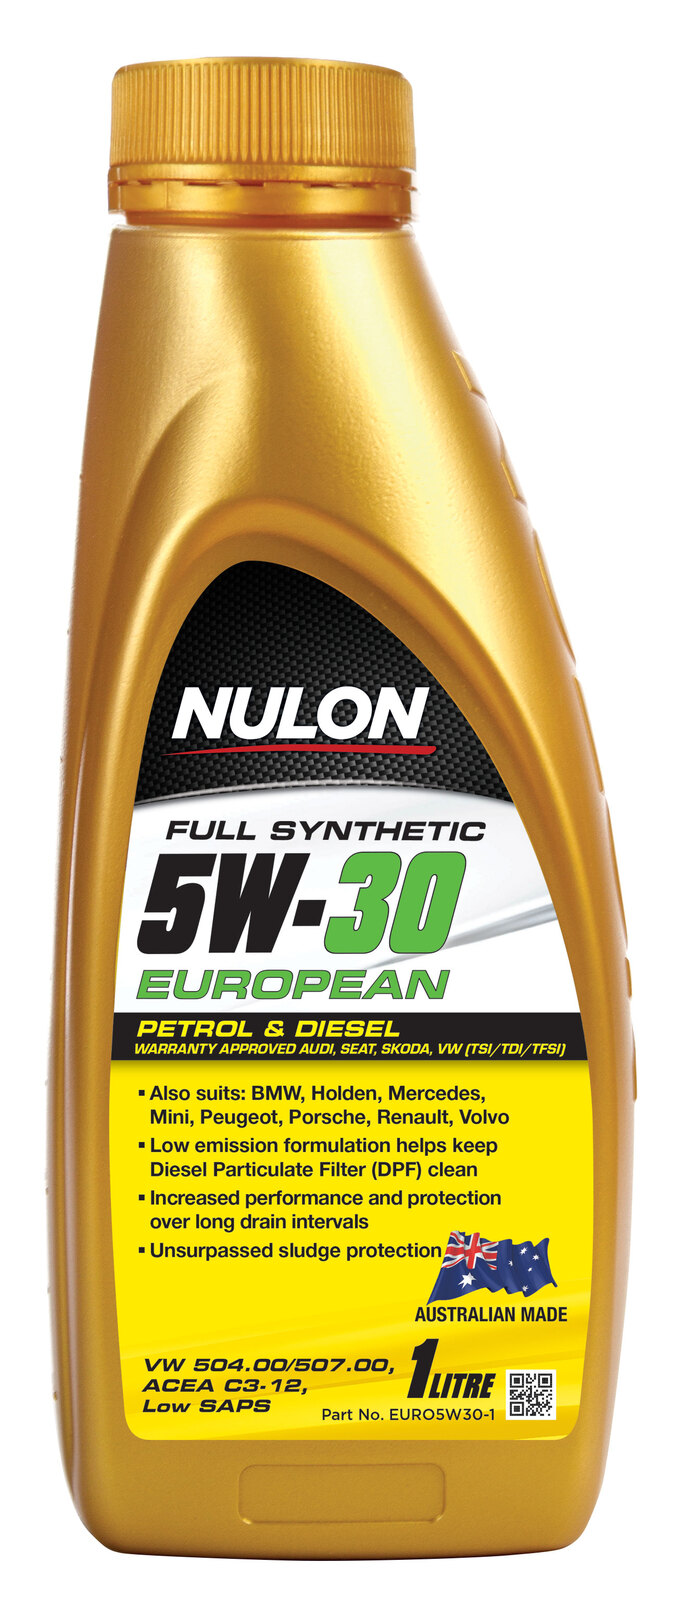 NULON Full Synthetic Euro Engine Oil1L, Each